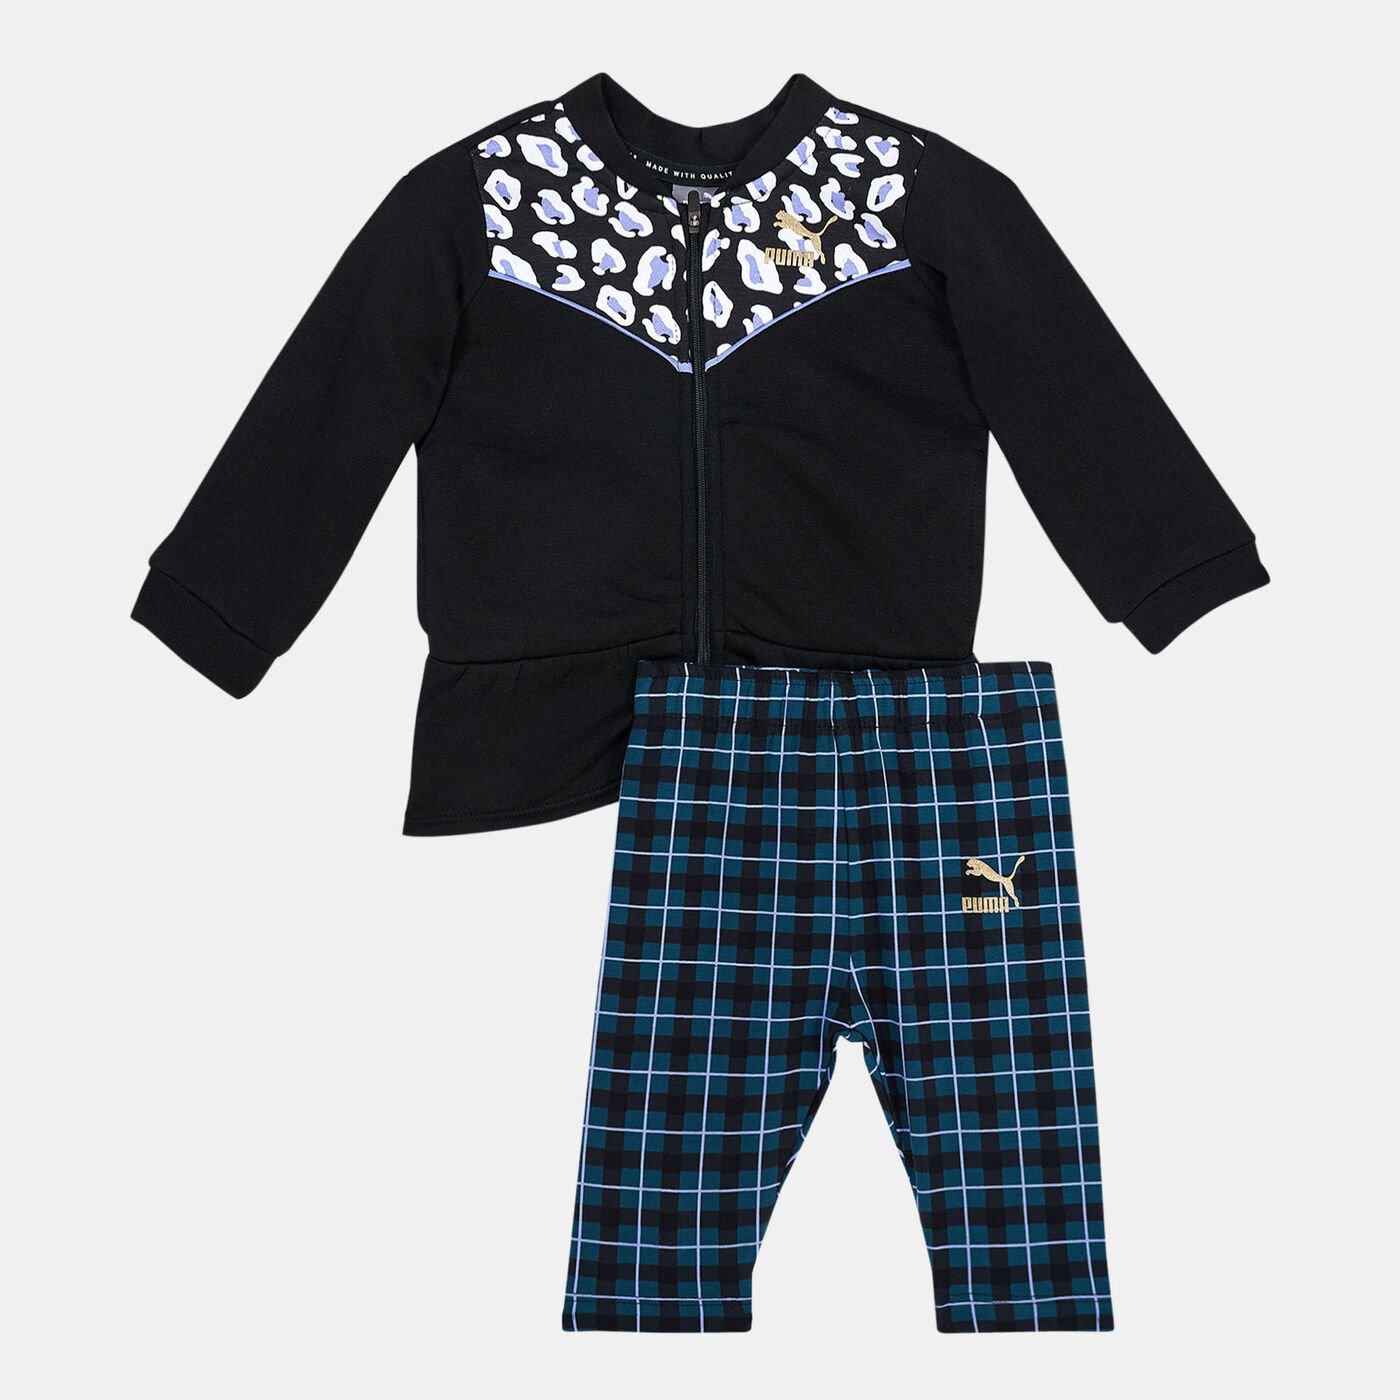 Kids' Minicats Prime 90s Prep Jogger Set (Baby and Toddler)